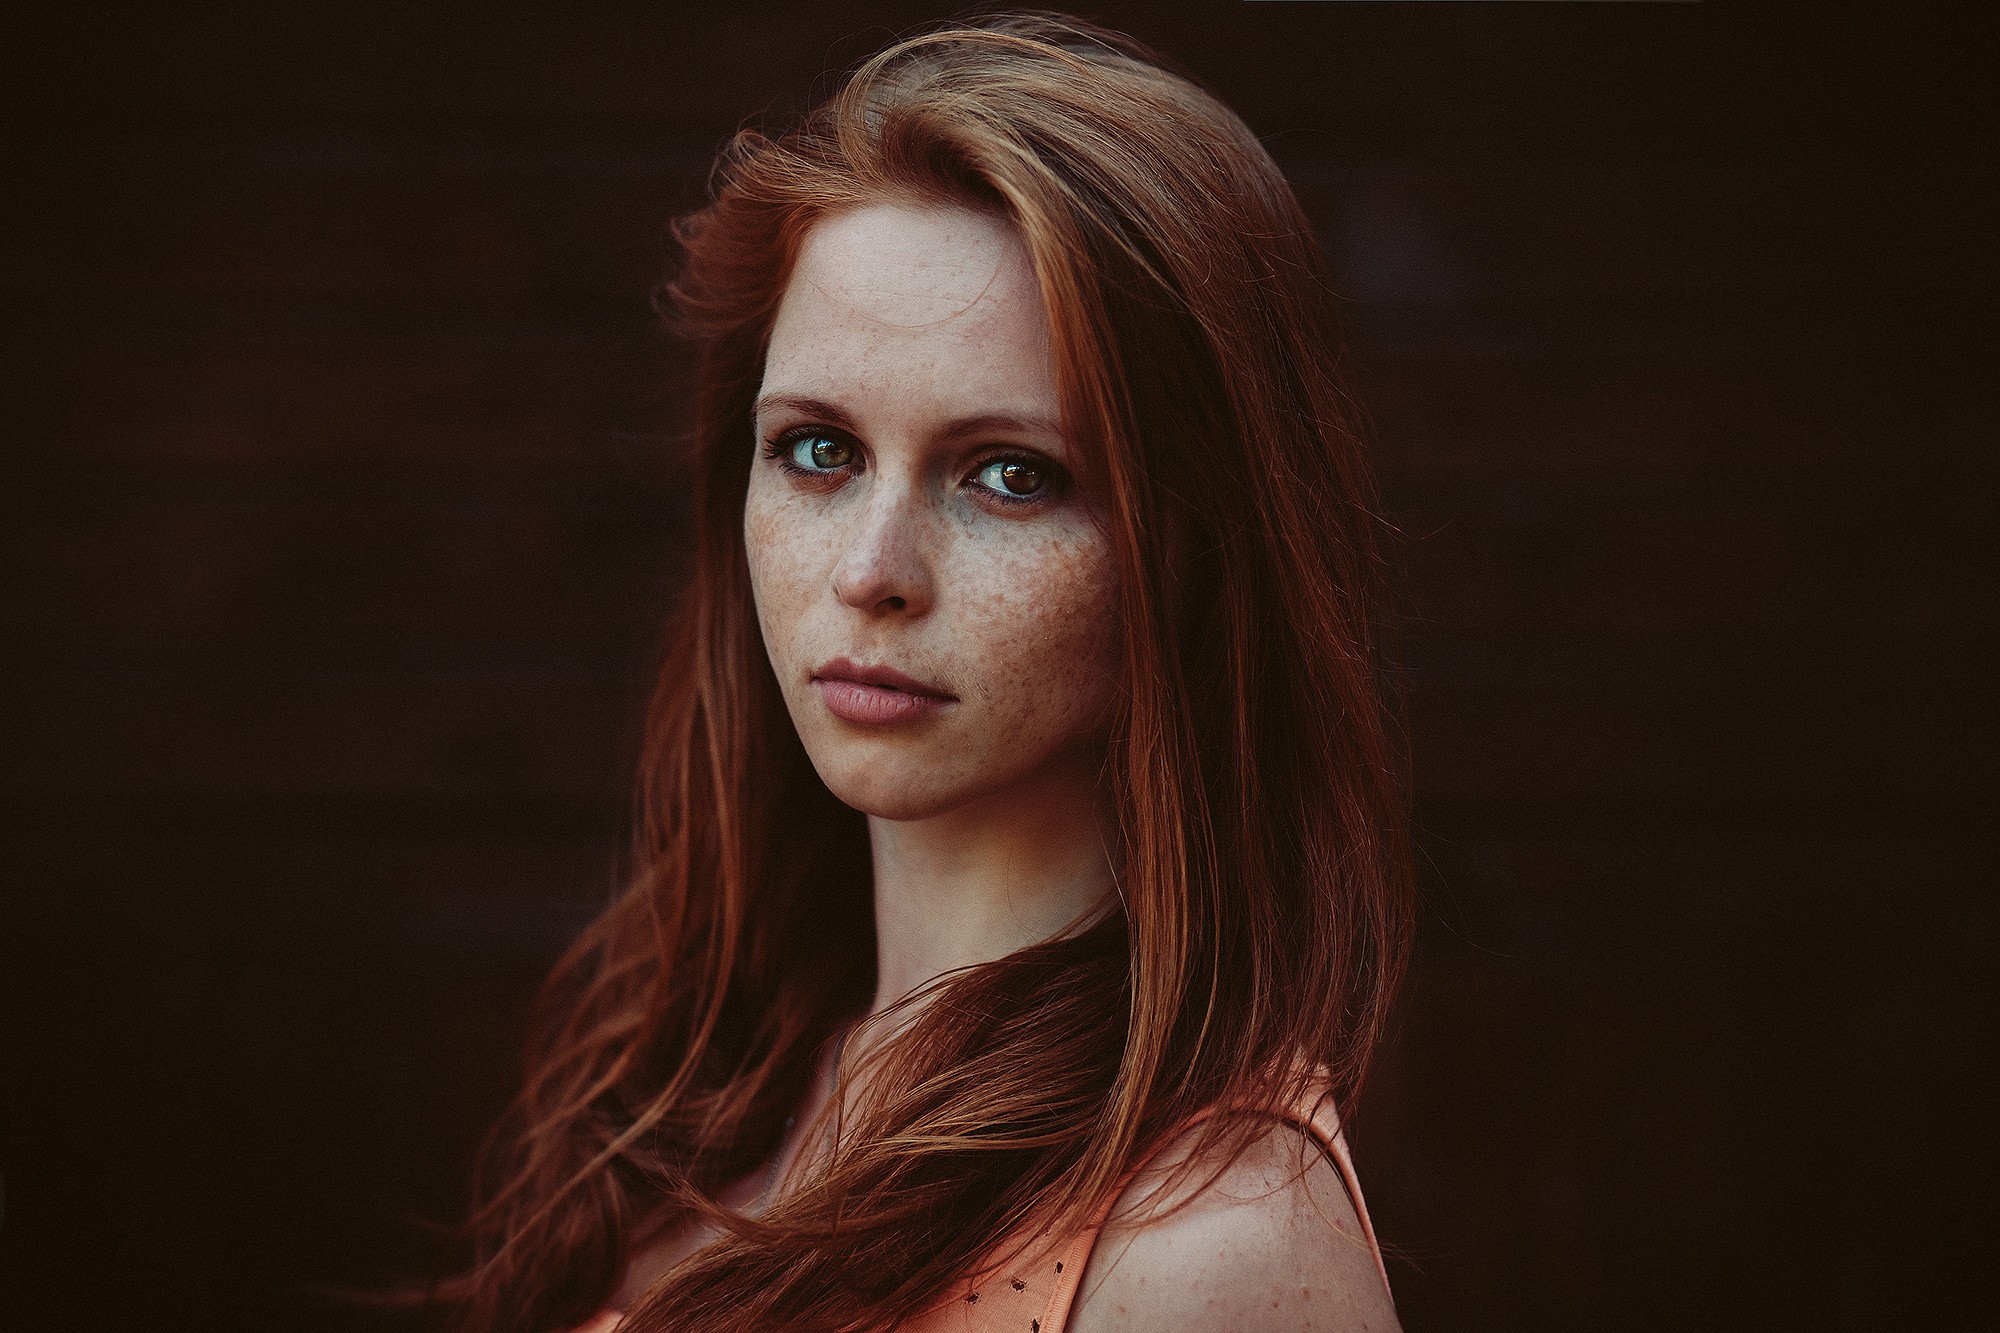 Women Model Redhead Long Hair Looking At Viewer Face Women Outdoors Portrait Freckles Bare